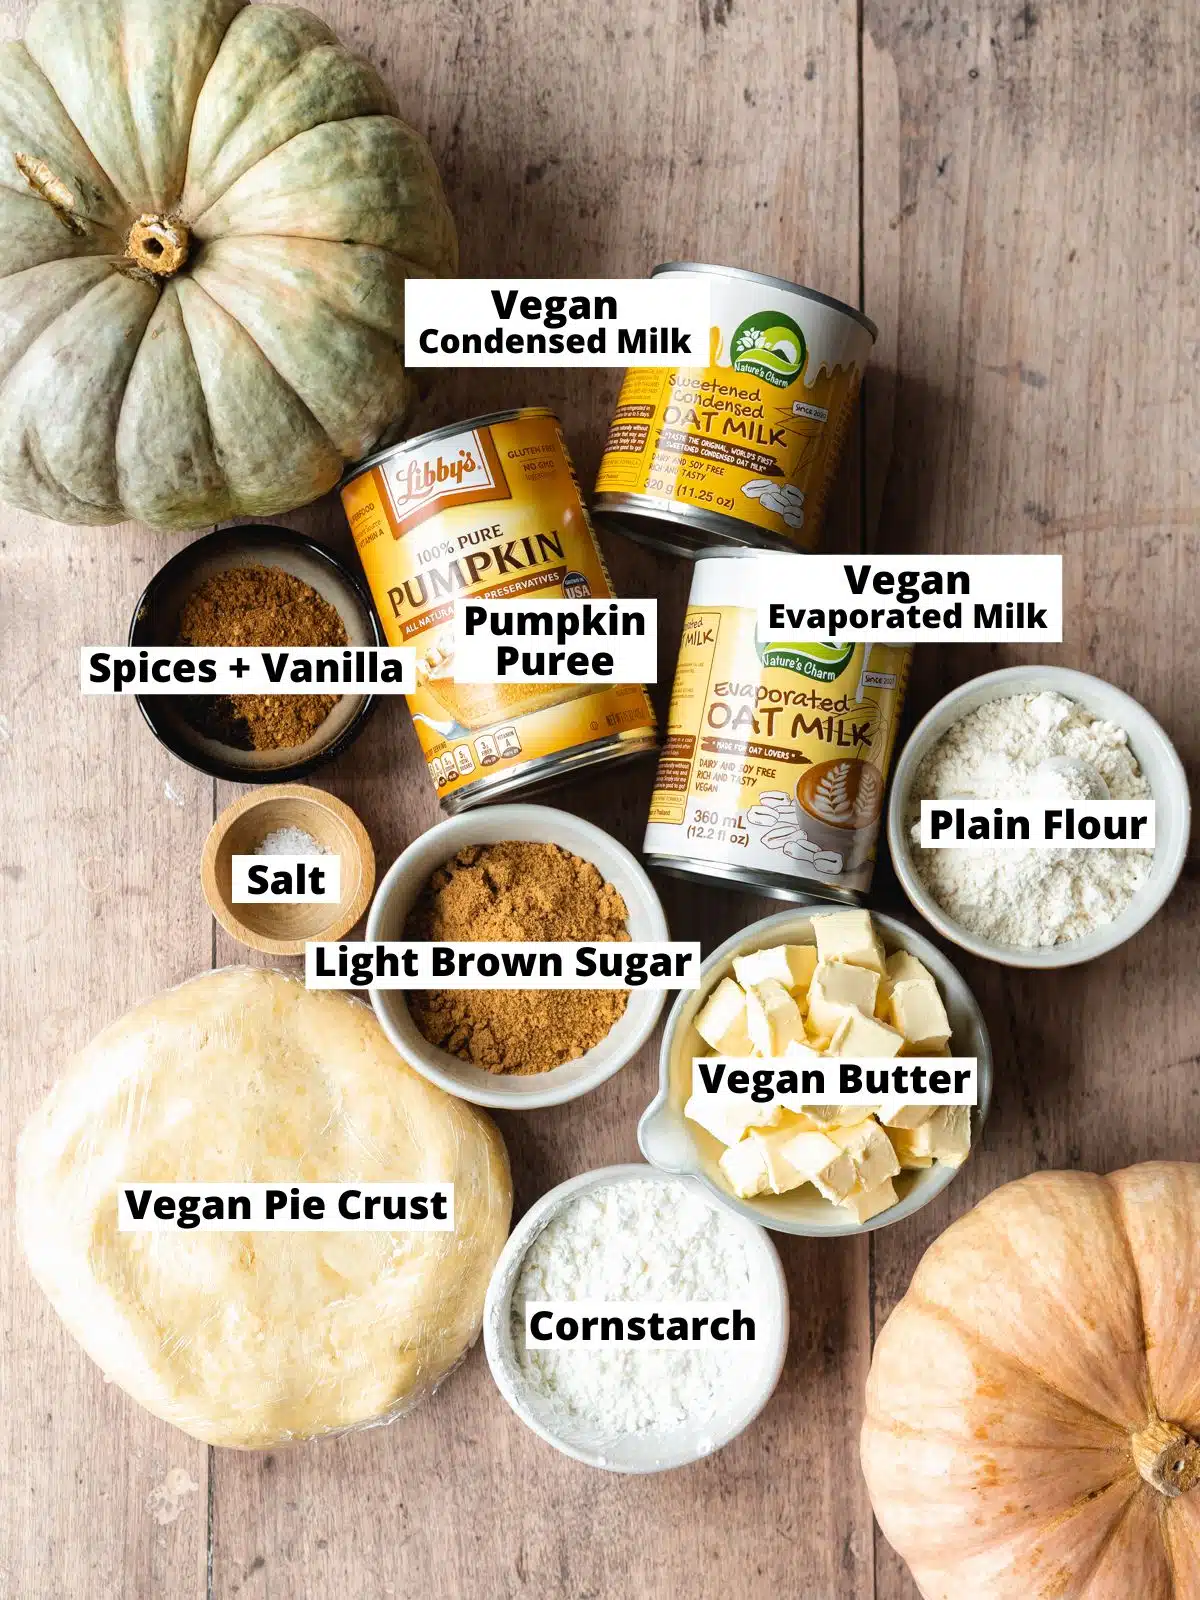 ingredients for vegan pumpkin pie measured out on a wooden surface.